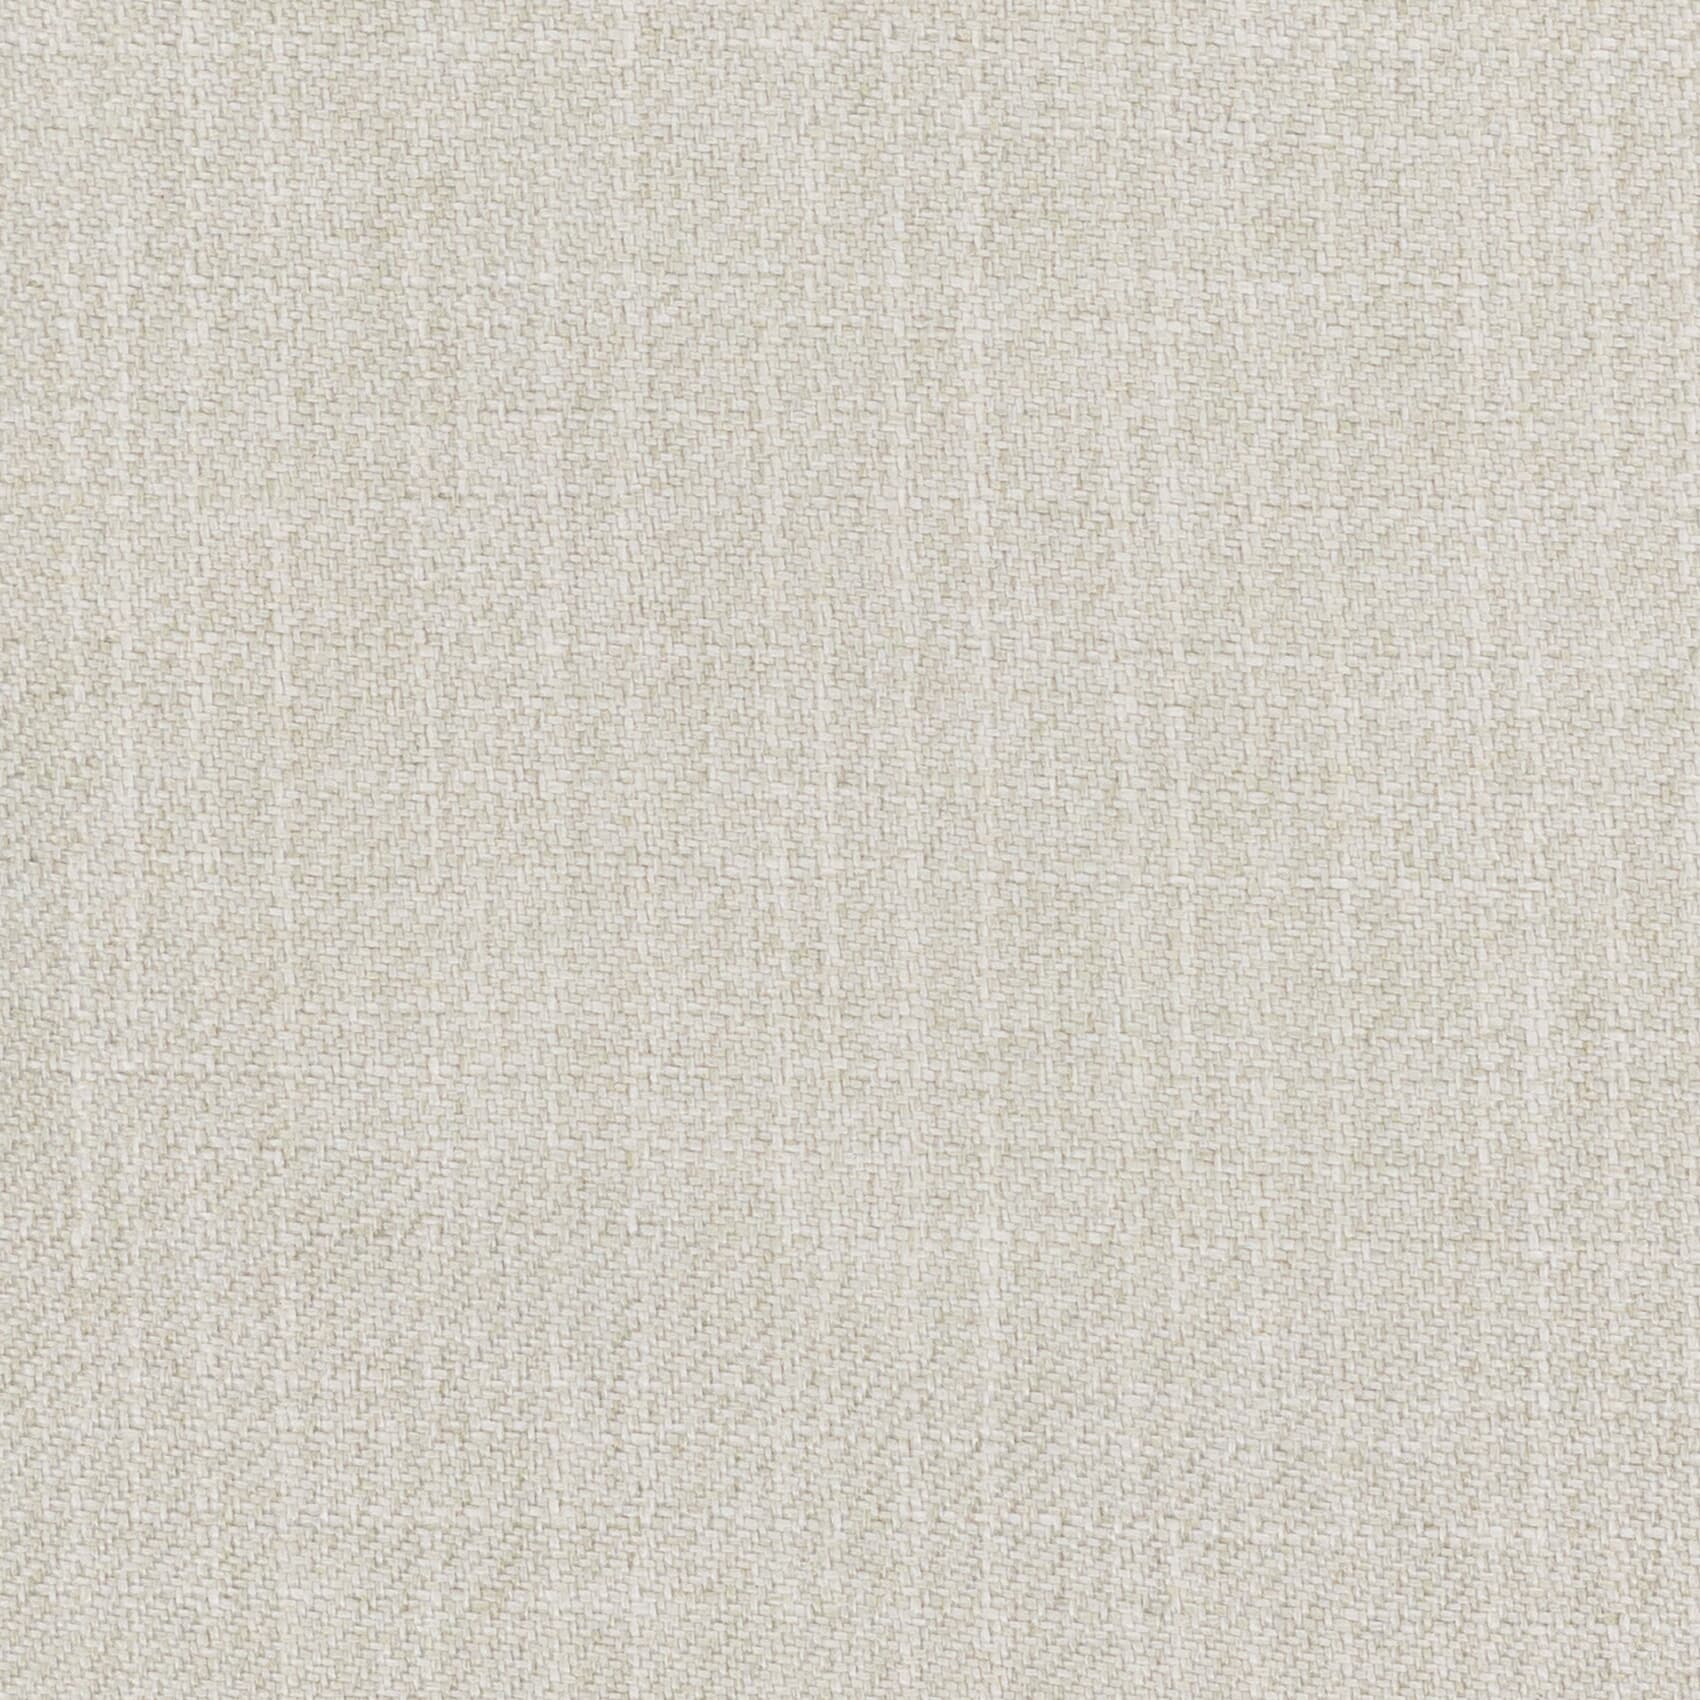 Hamdenville 1 Beige by Stout Fabric